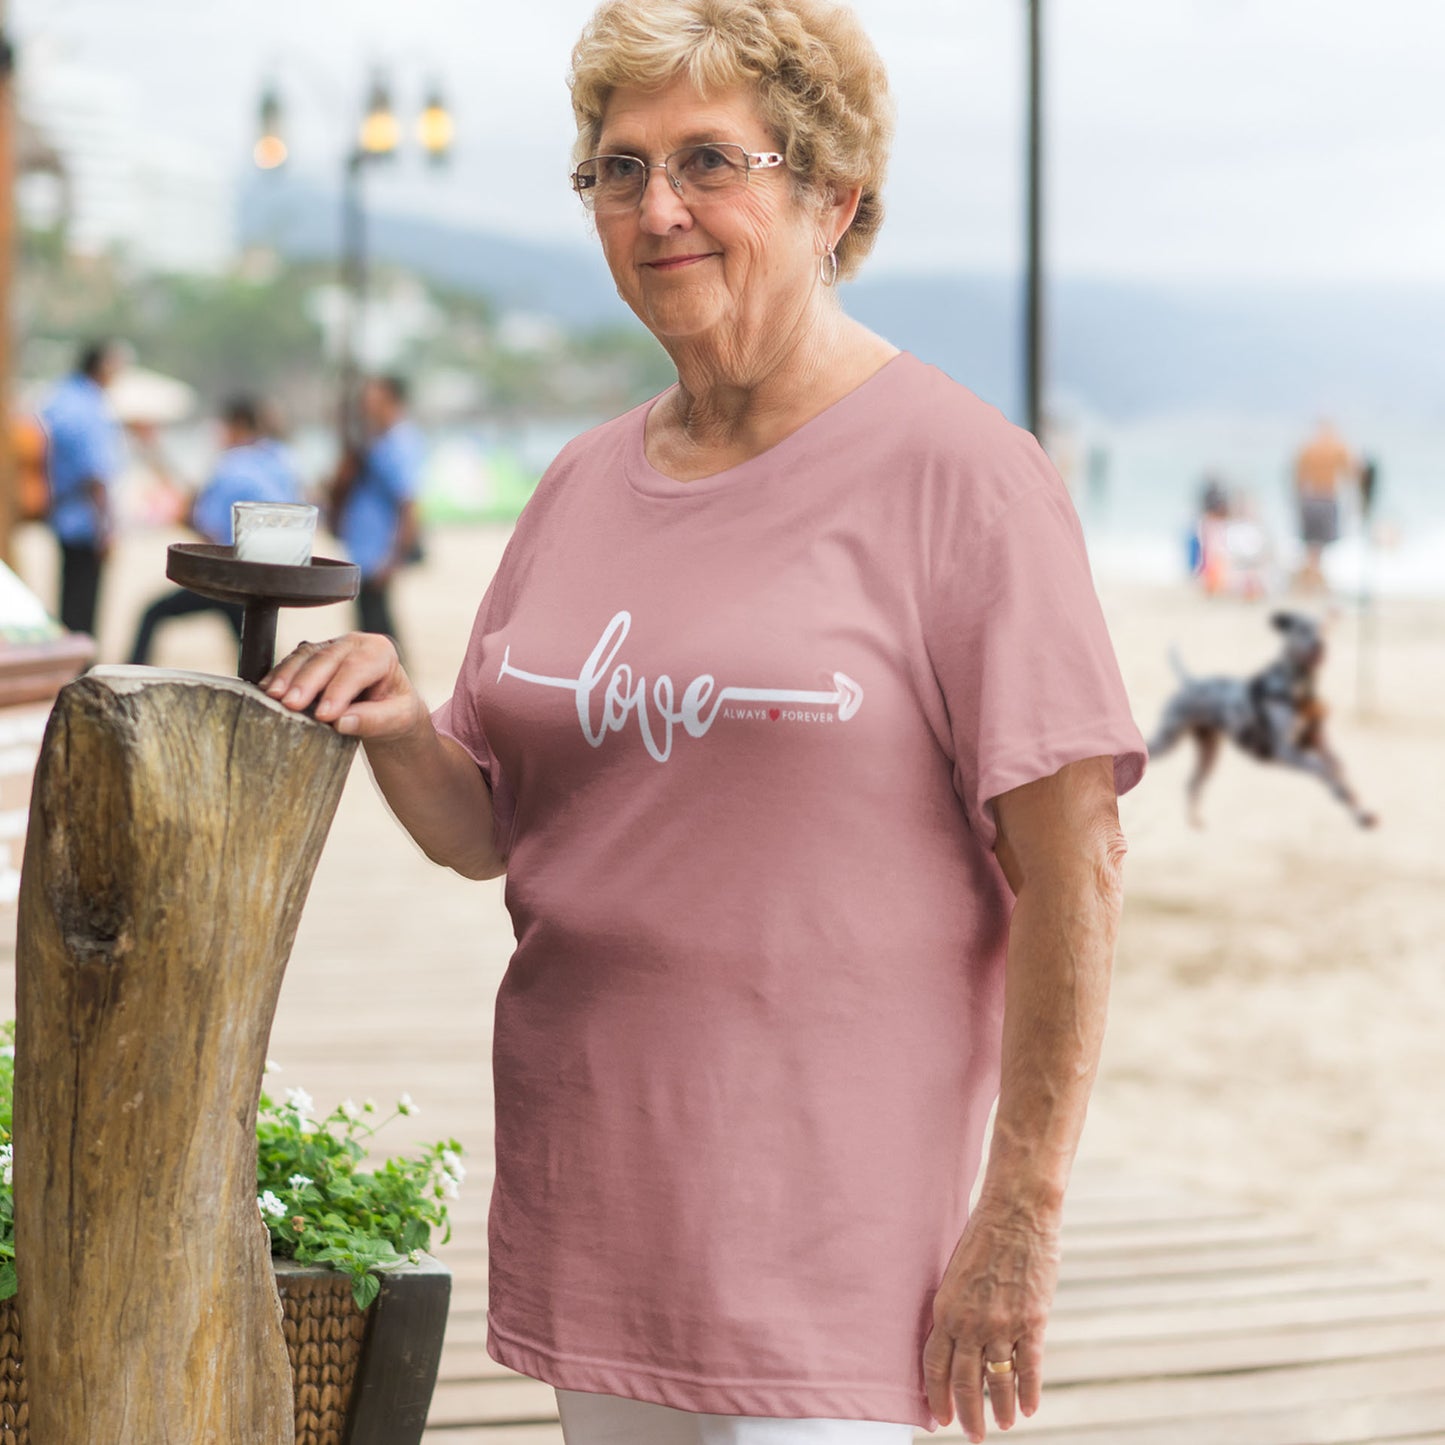  A woman wearing a heather mauve Dogs Pure Love tee with the word "Love" and an arrow stands near a cafe, touching an upright log, while a dog runs on the beach behind her.